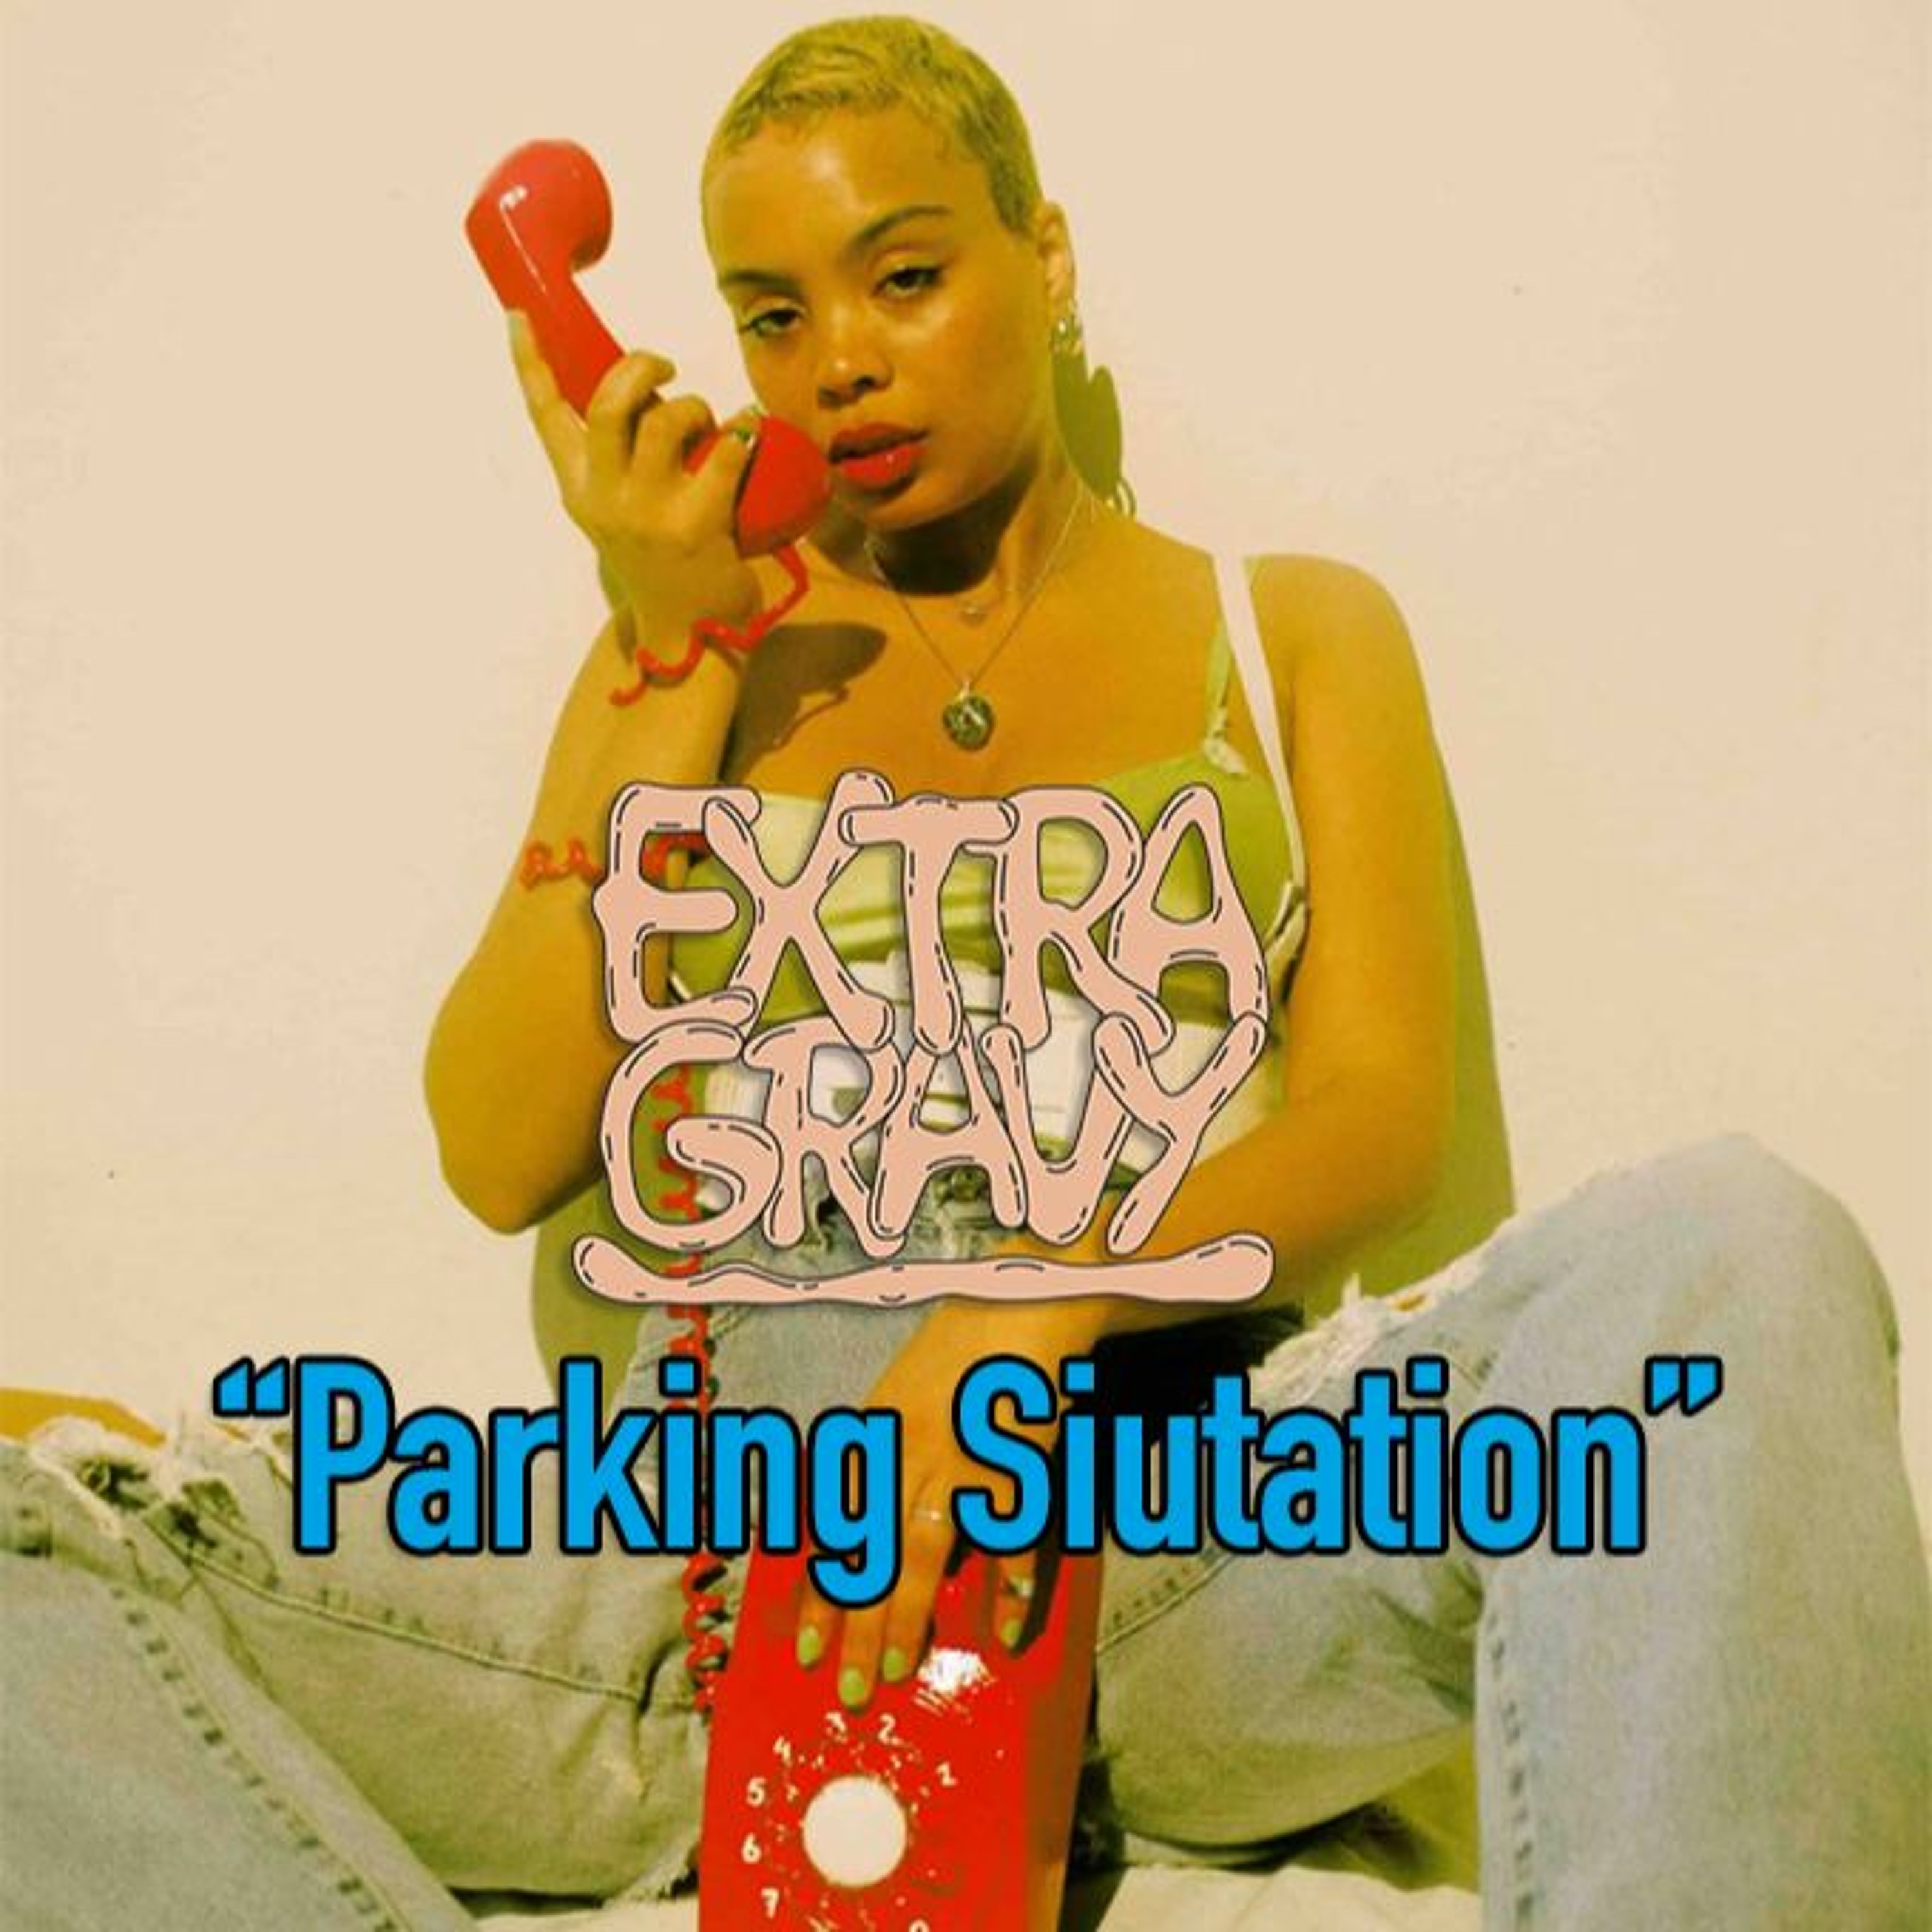 Thumbnail for "Parking Situation ft. Mighloe".